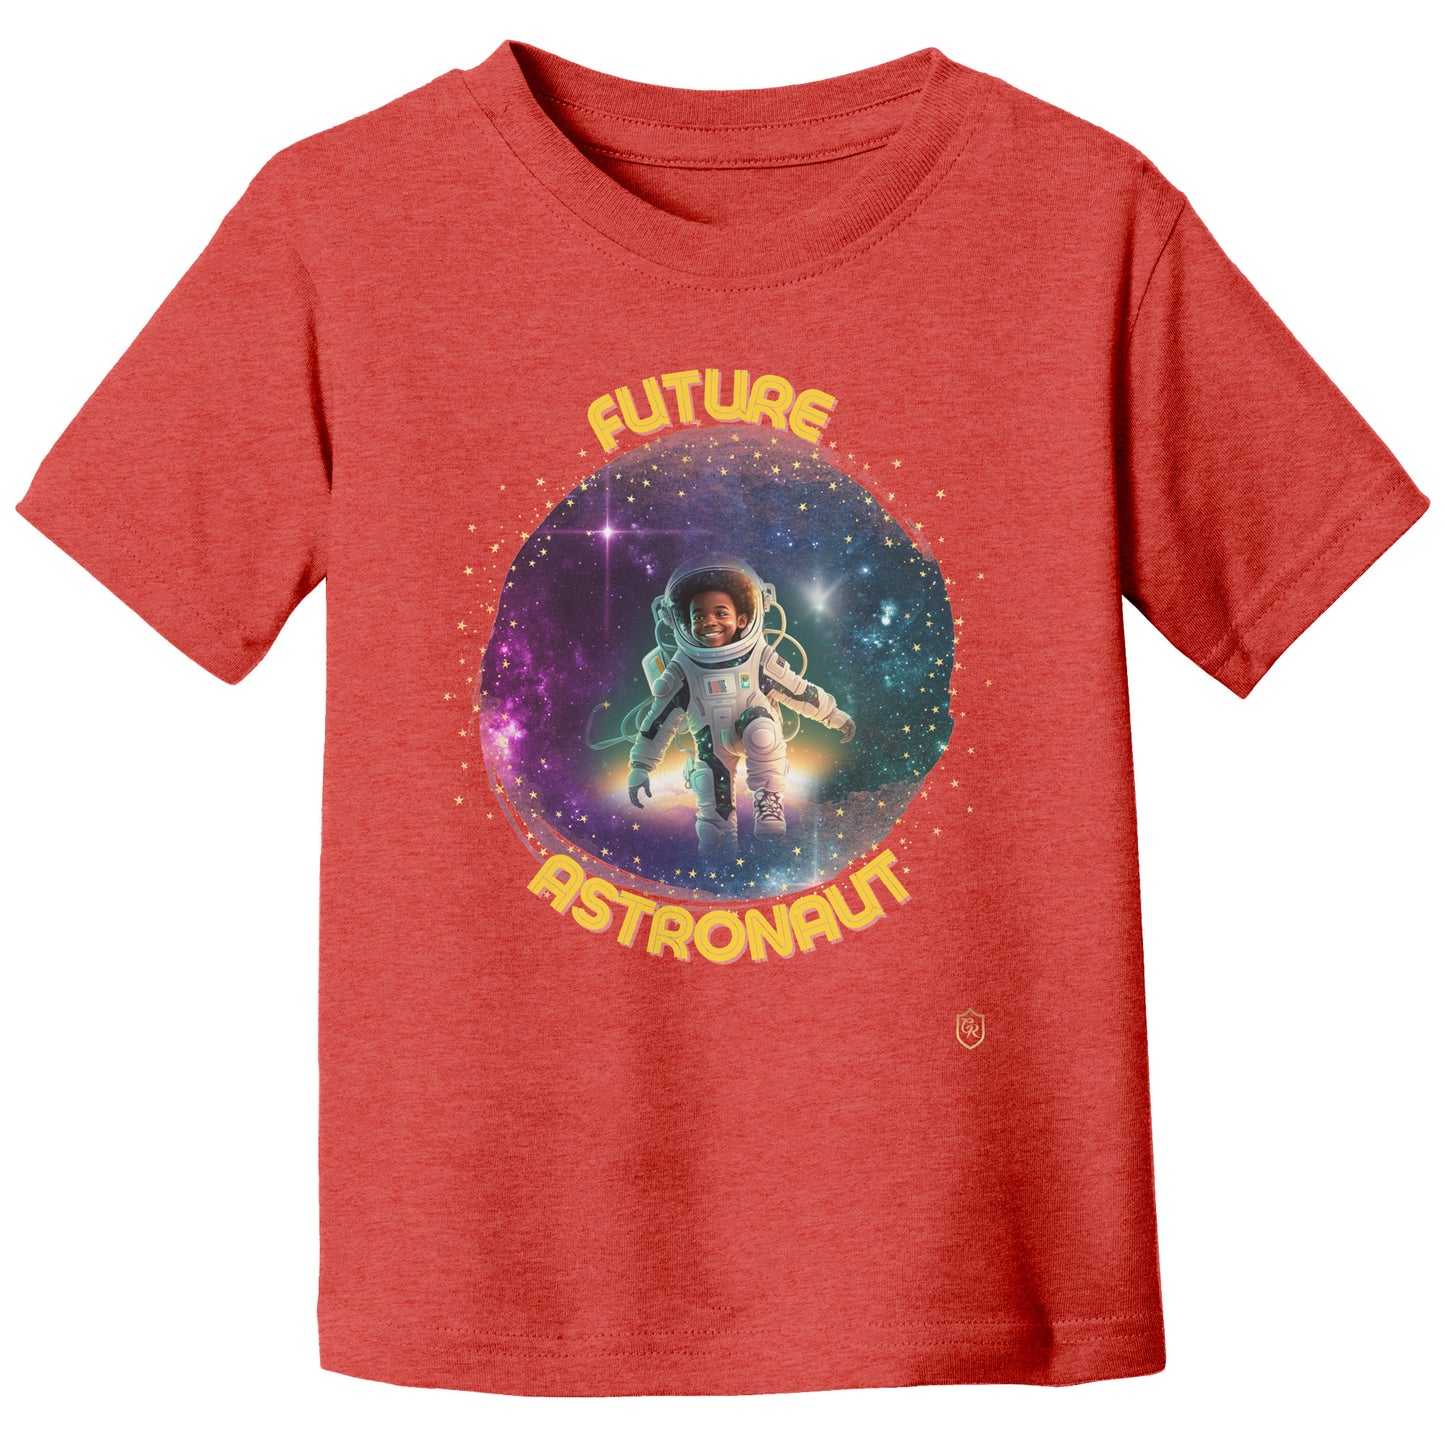 Boy's Galactic Explorer T-shirt: The Official Astronaut Gear of the Future